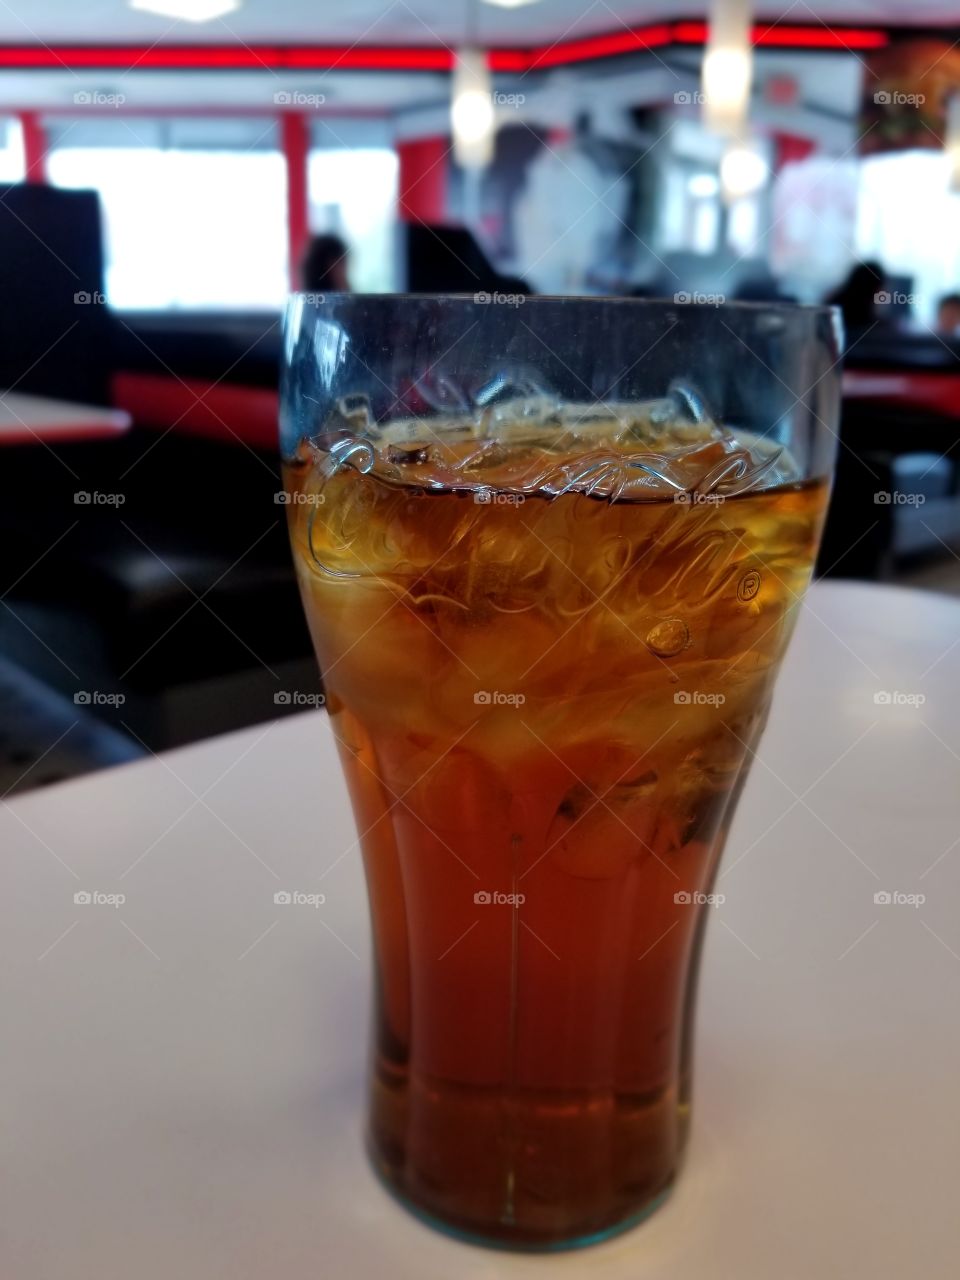 The Best Drink For a Coke Glass